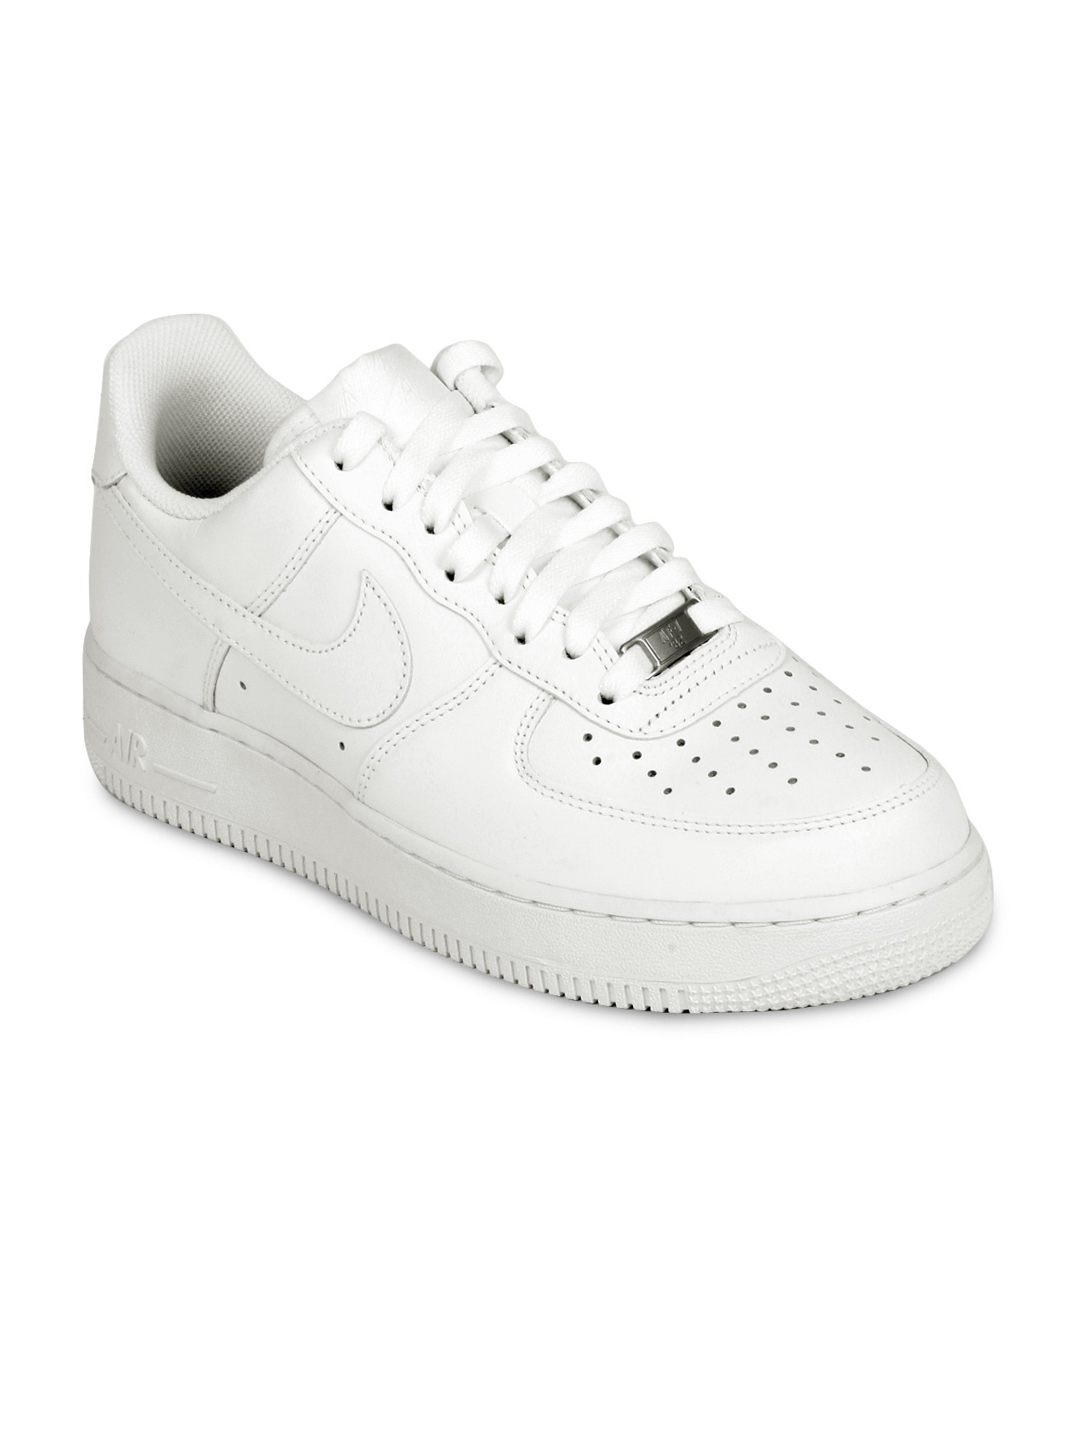 white nike sneakers air force